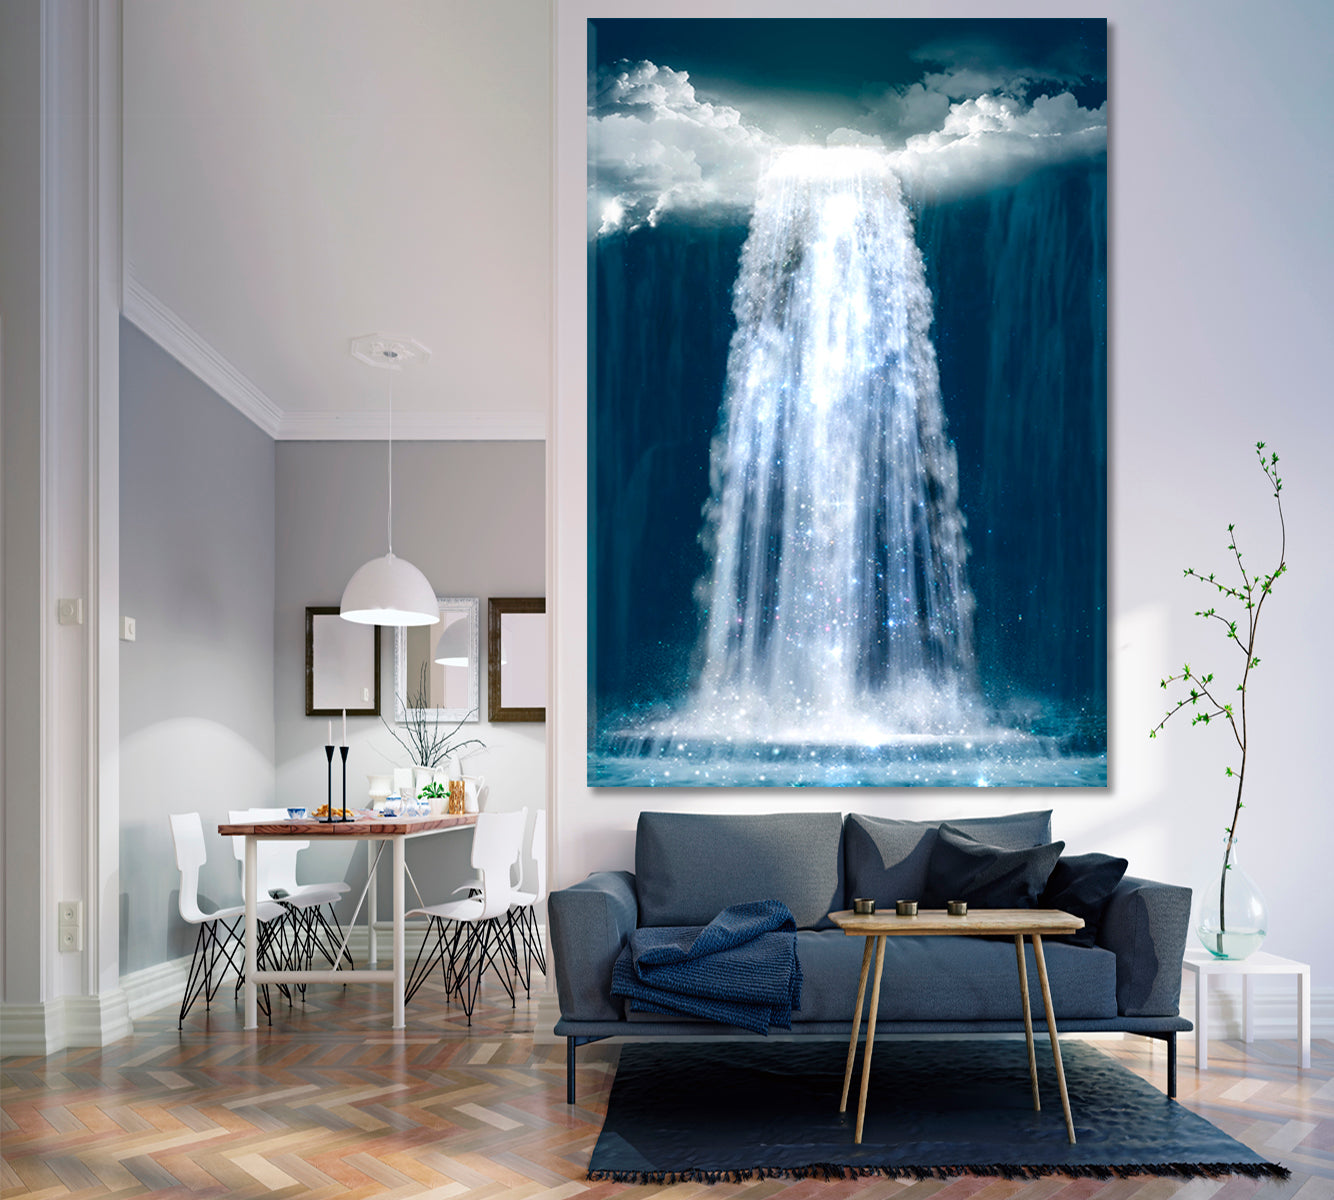 UNREAL Fantasy Waterfall Falls From Heaven Mesmerizing Magical Scenic | Vertical Surreal Fantasy Large Art Print Décor Artesty   